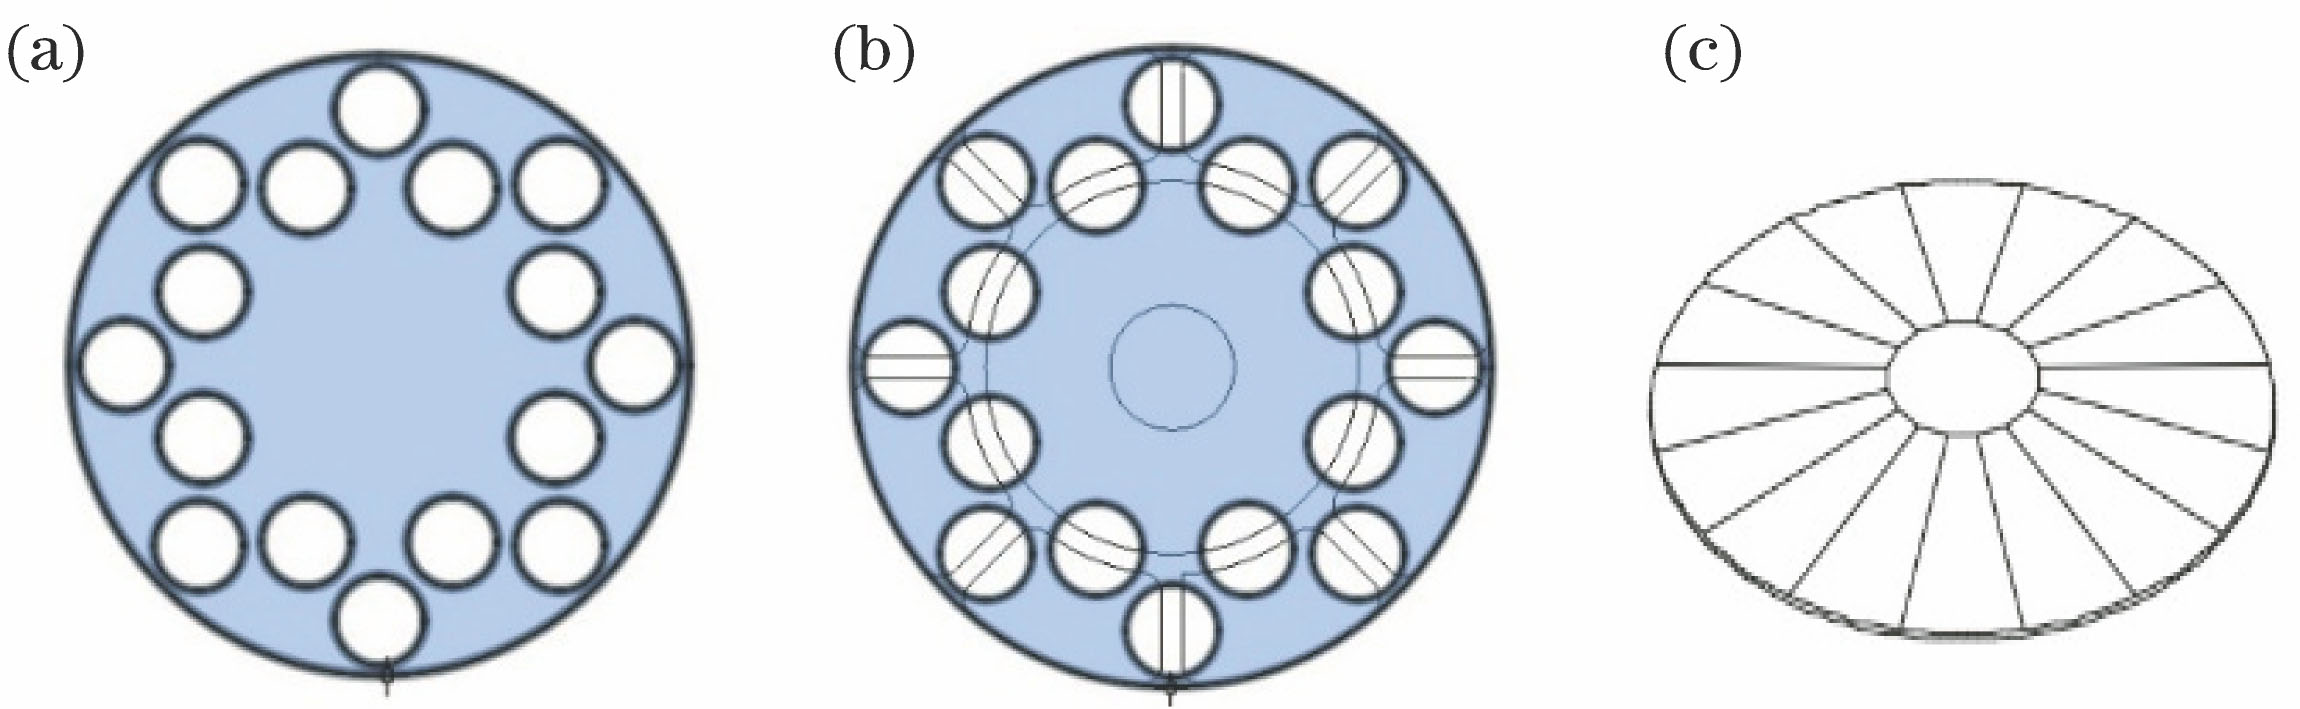 (a) Schematic of the mask plate; (b) alignment schematic of mask plate and segmented mirrors; (c) prism array